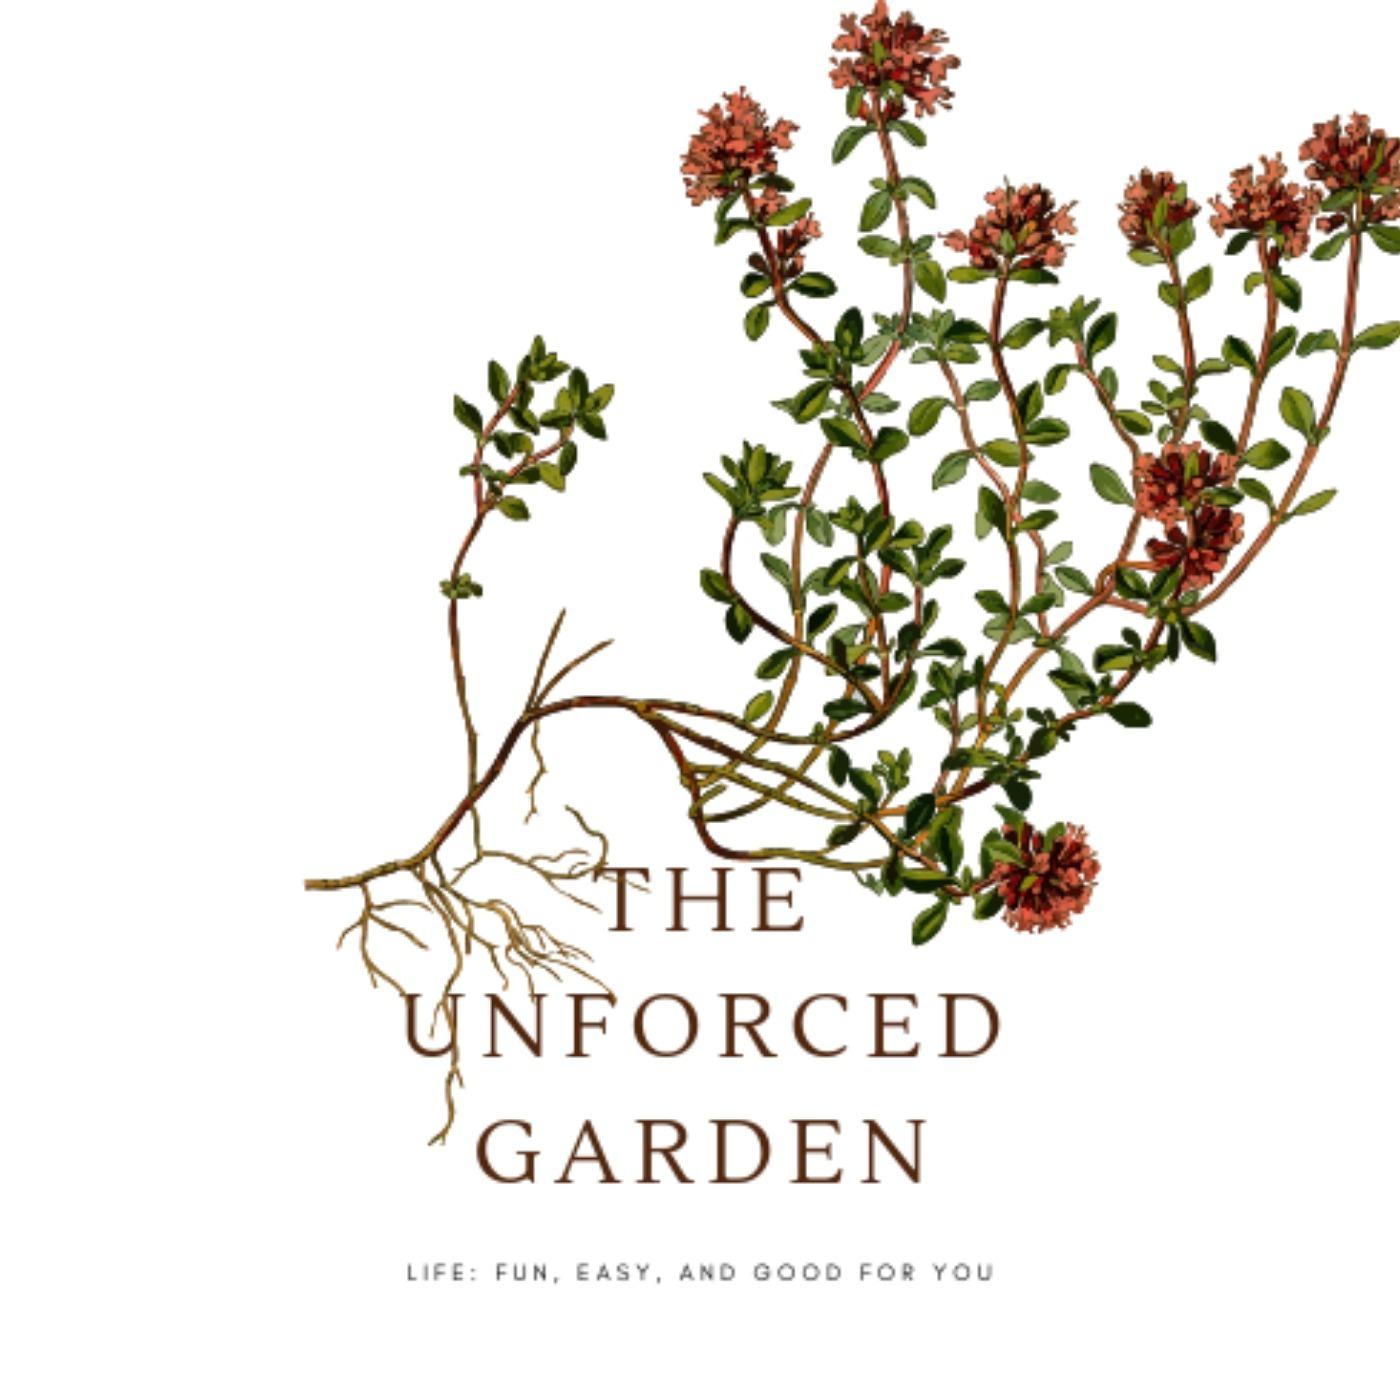 The Unforced Garden - Life: Fun, Easy, and Good for You